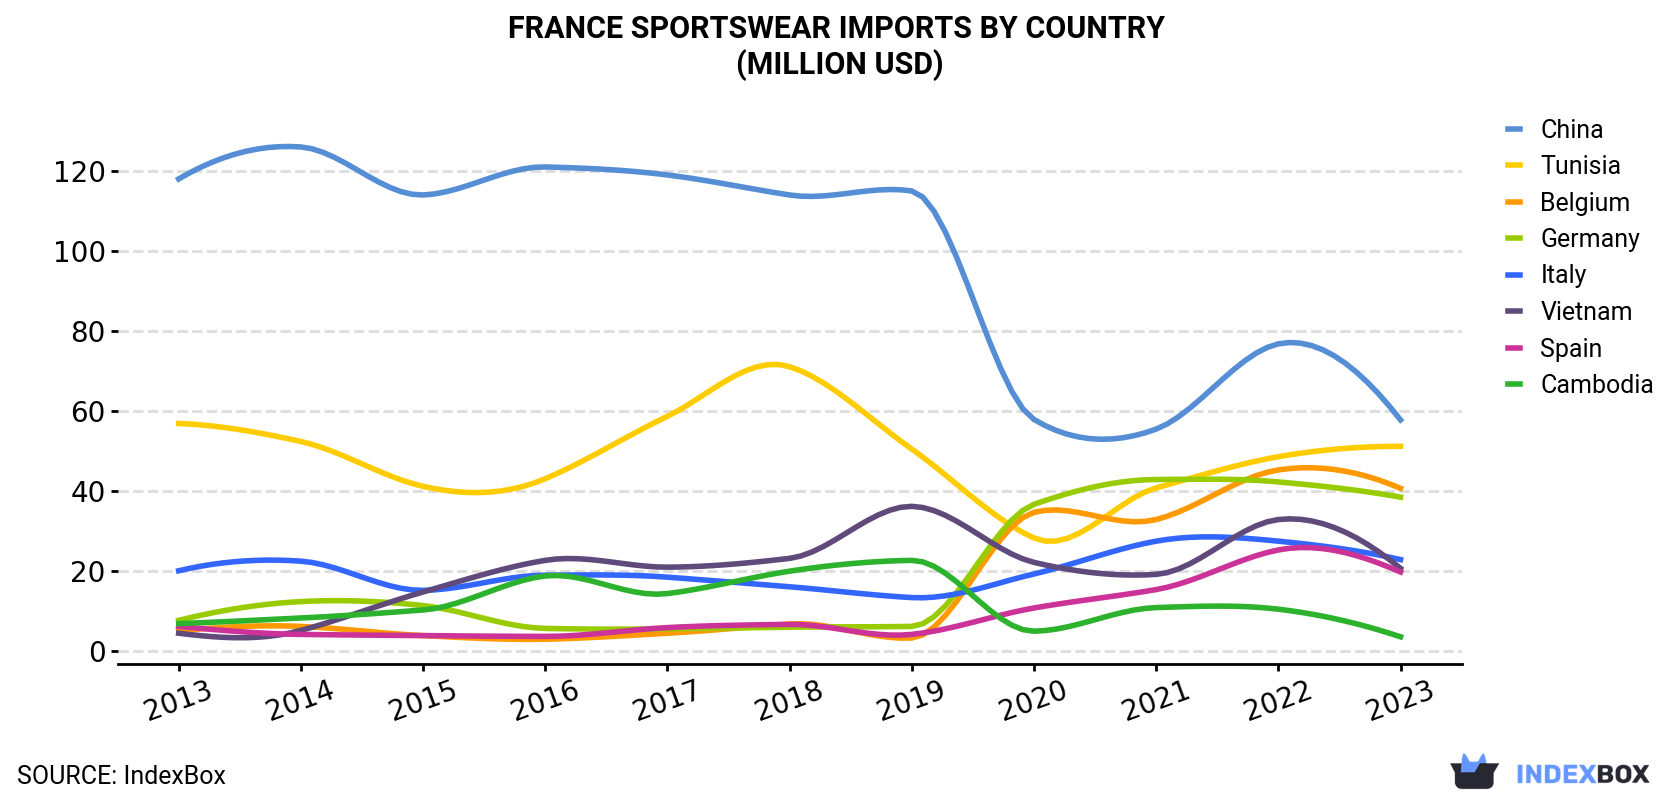 France Sportswear Imports By Country (Million USD)